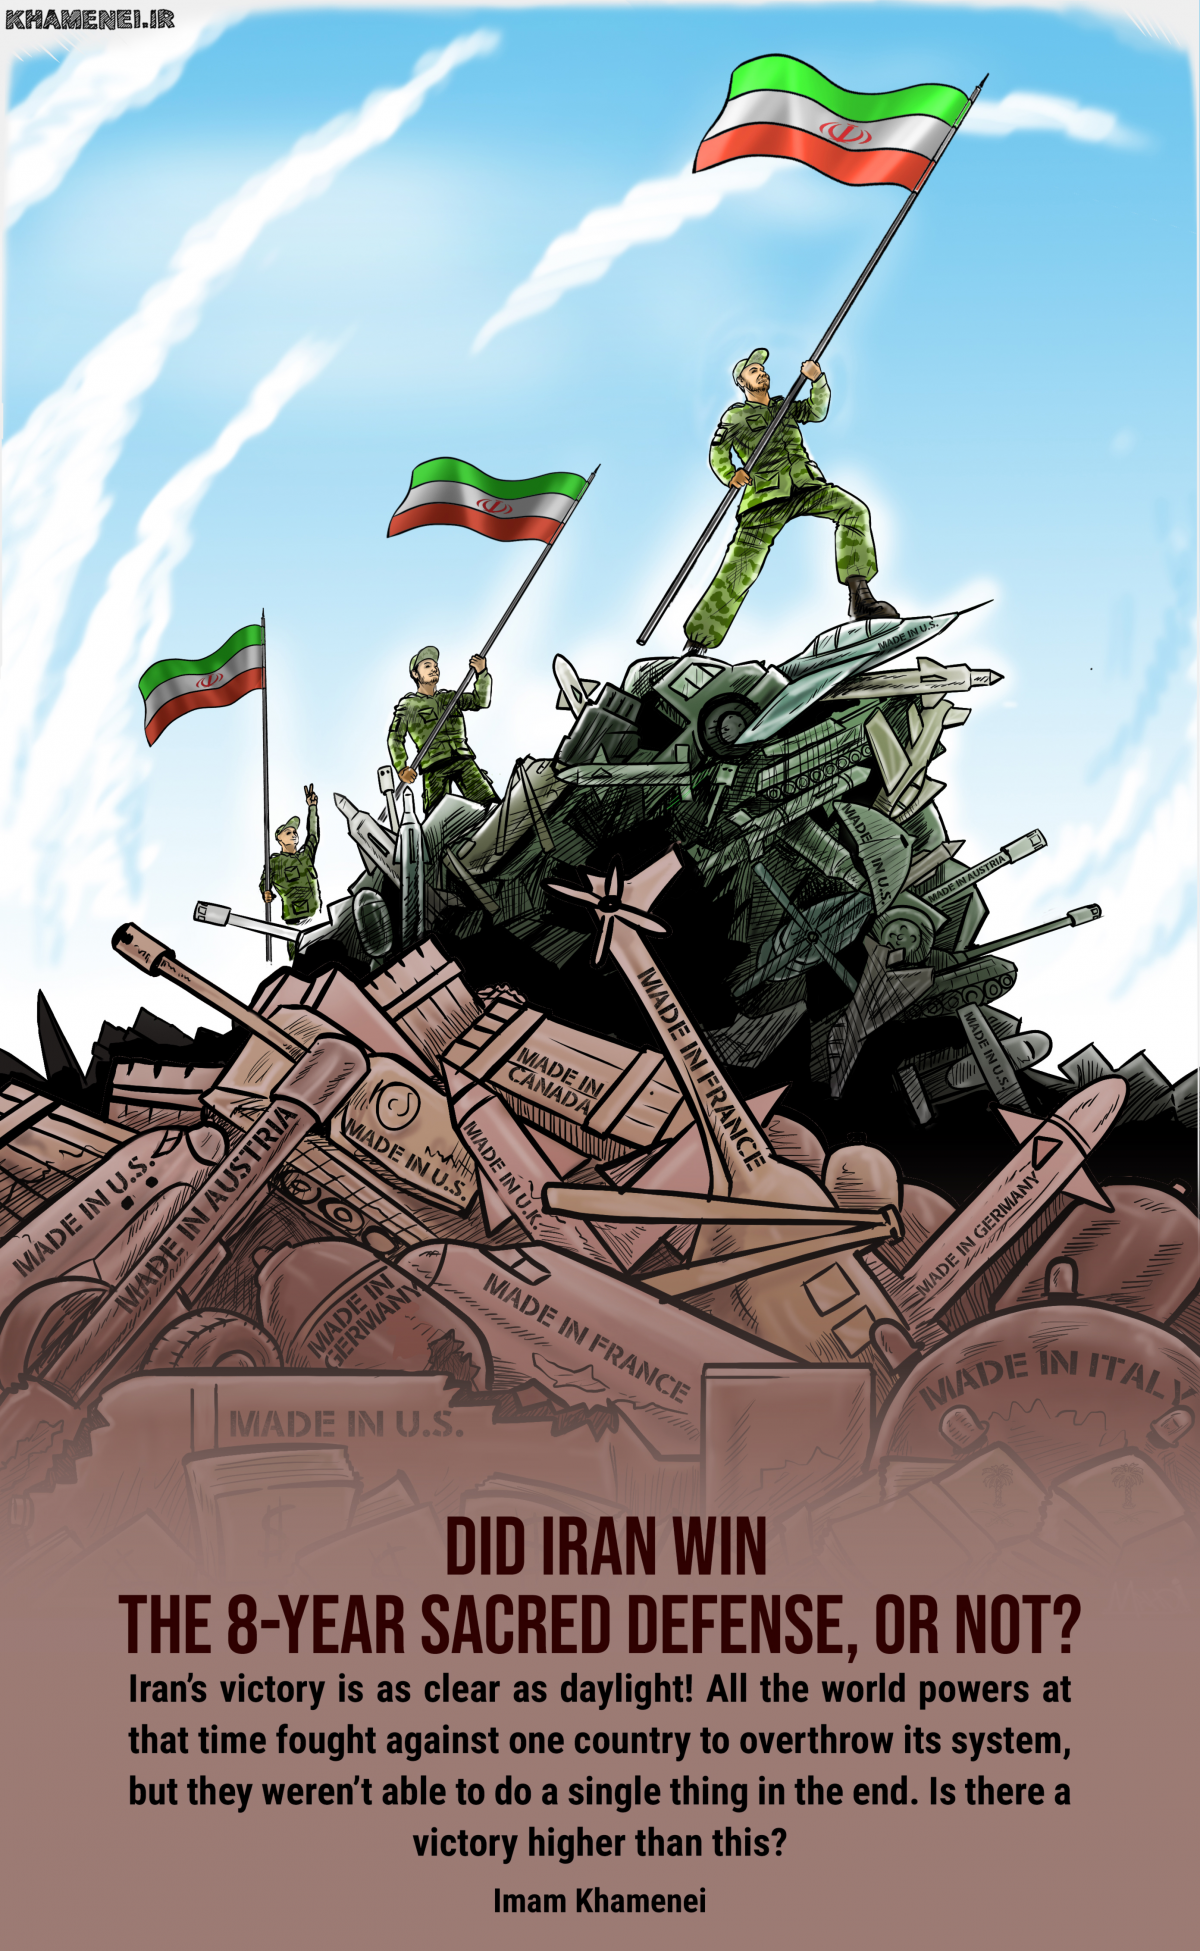 Did Iran win the 8-year Sacred Defense, or not?